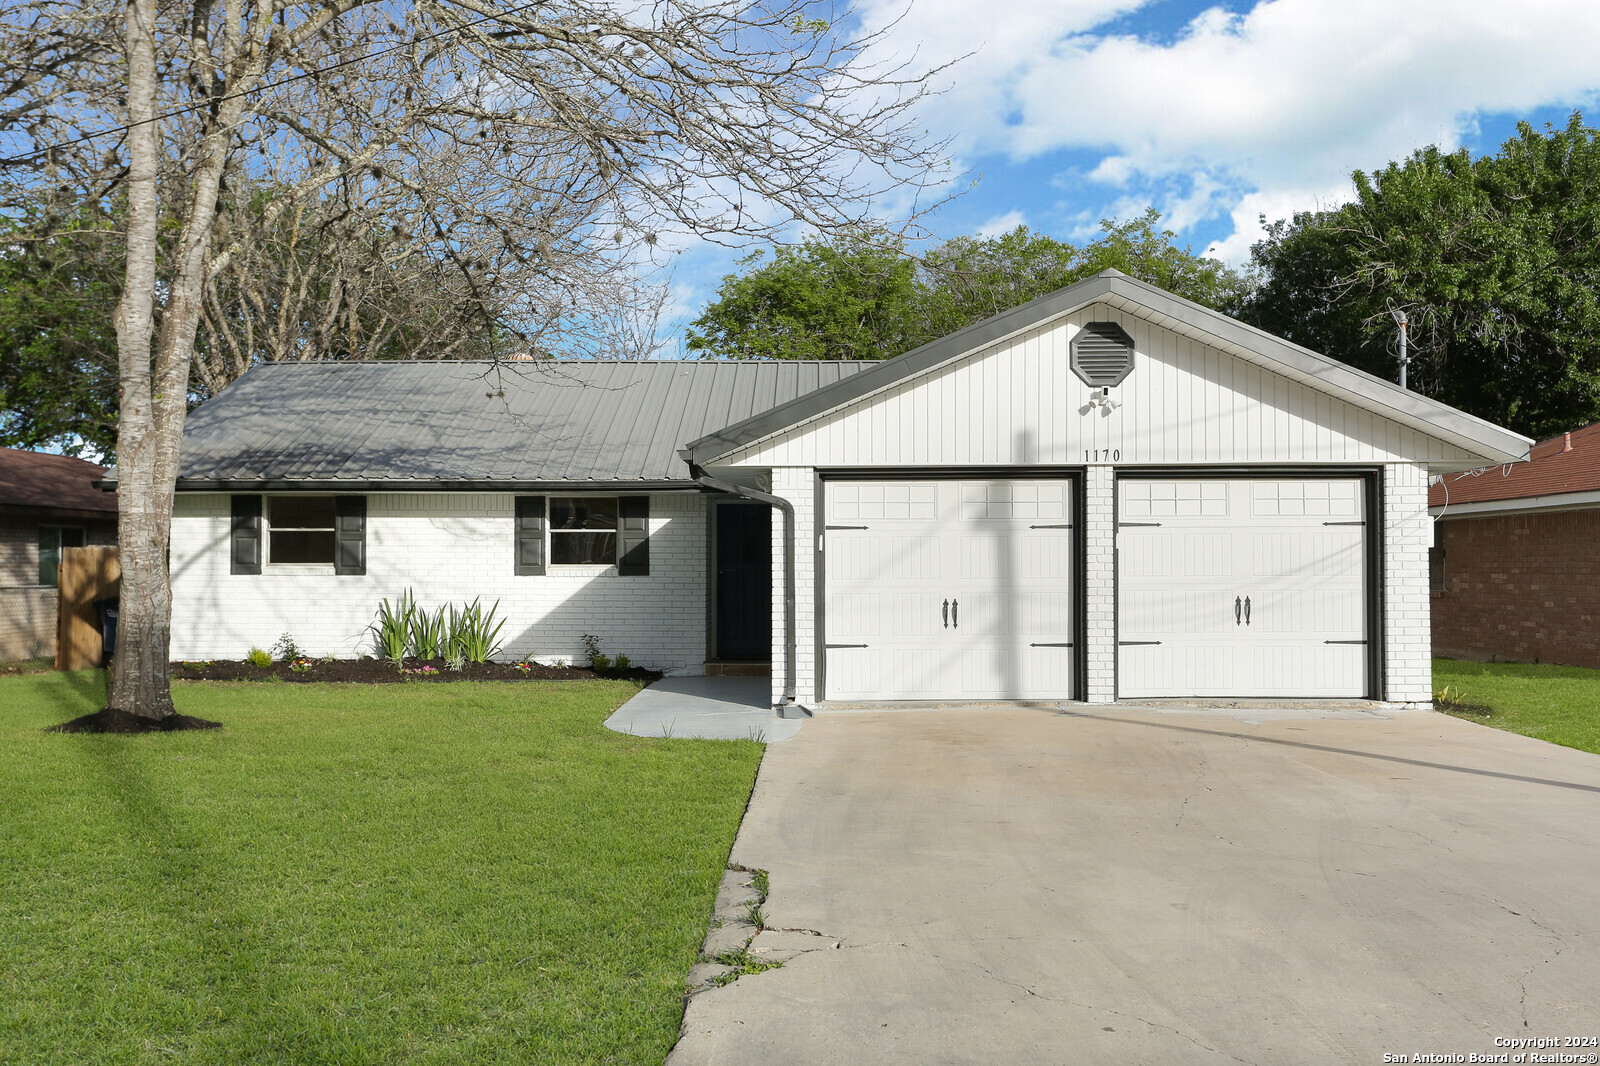 Photo of 1170 Lee in New Braunfels, TX